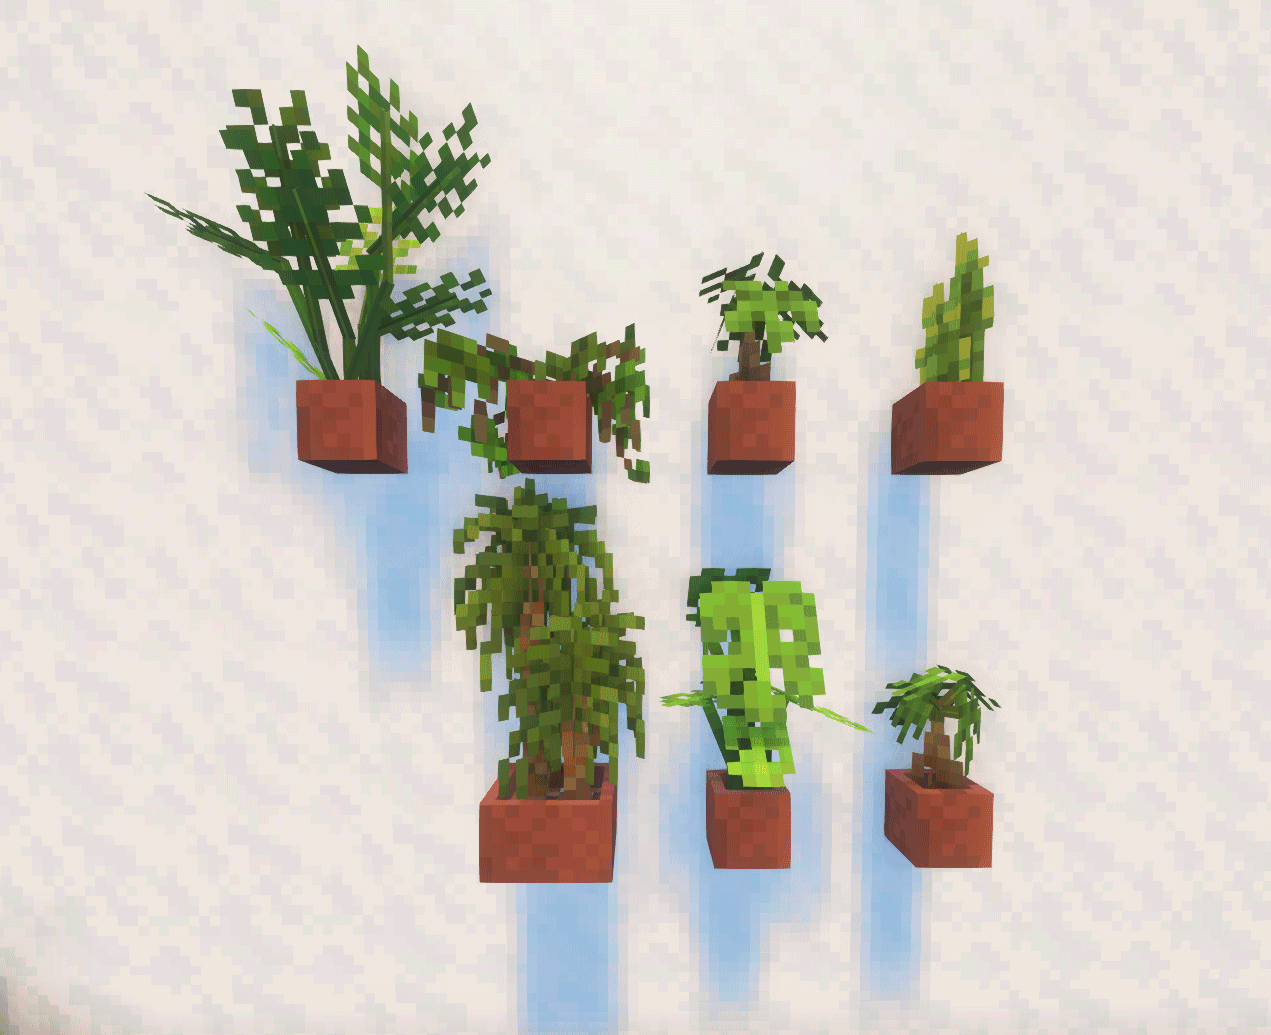 All potted plants